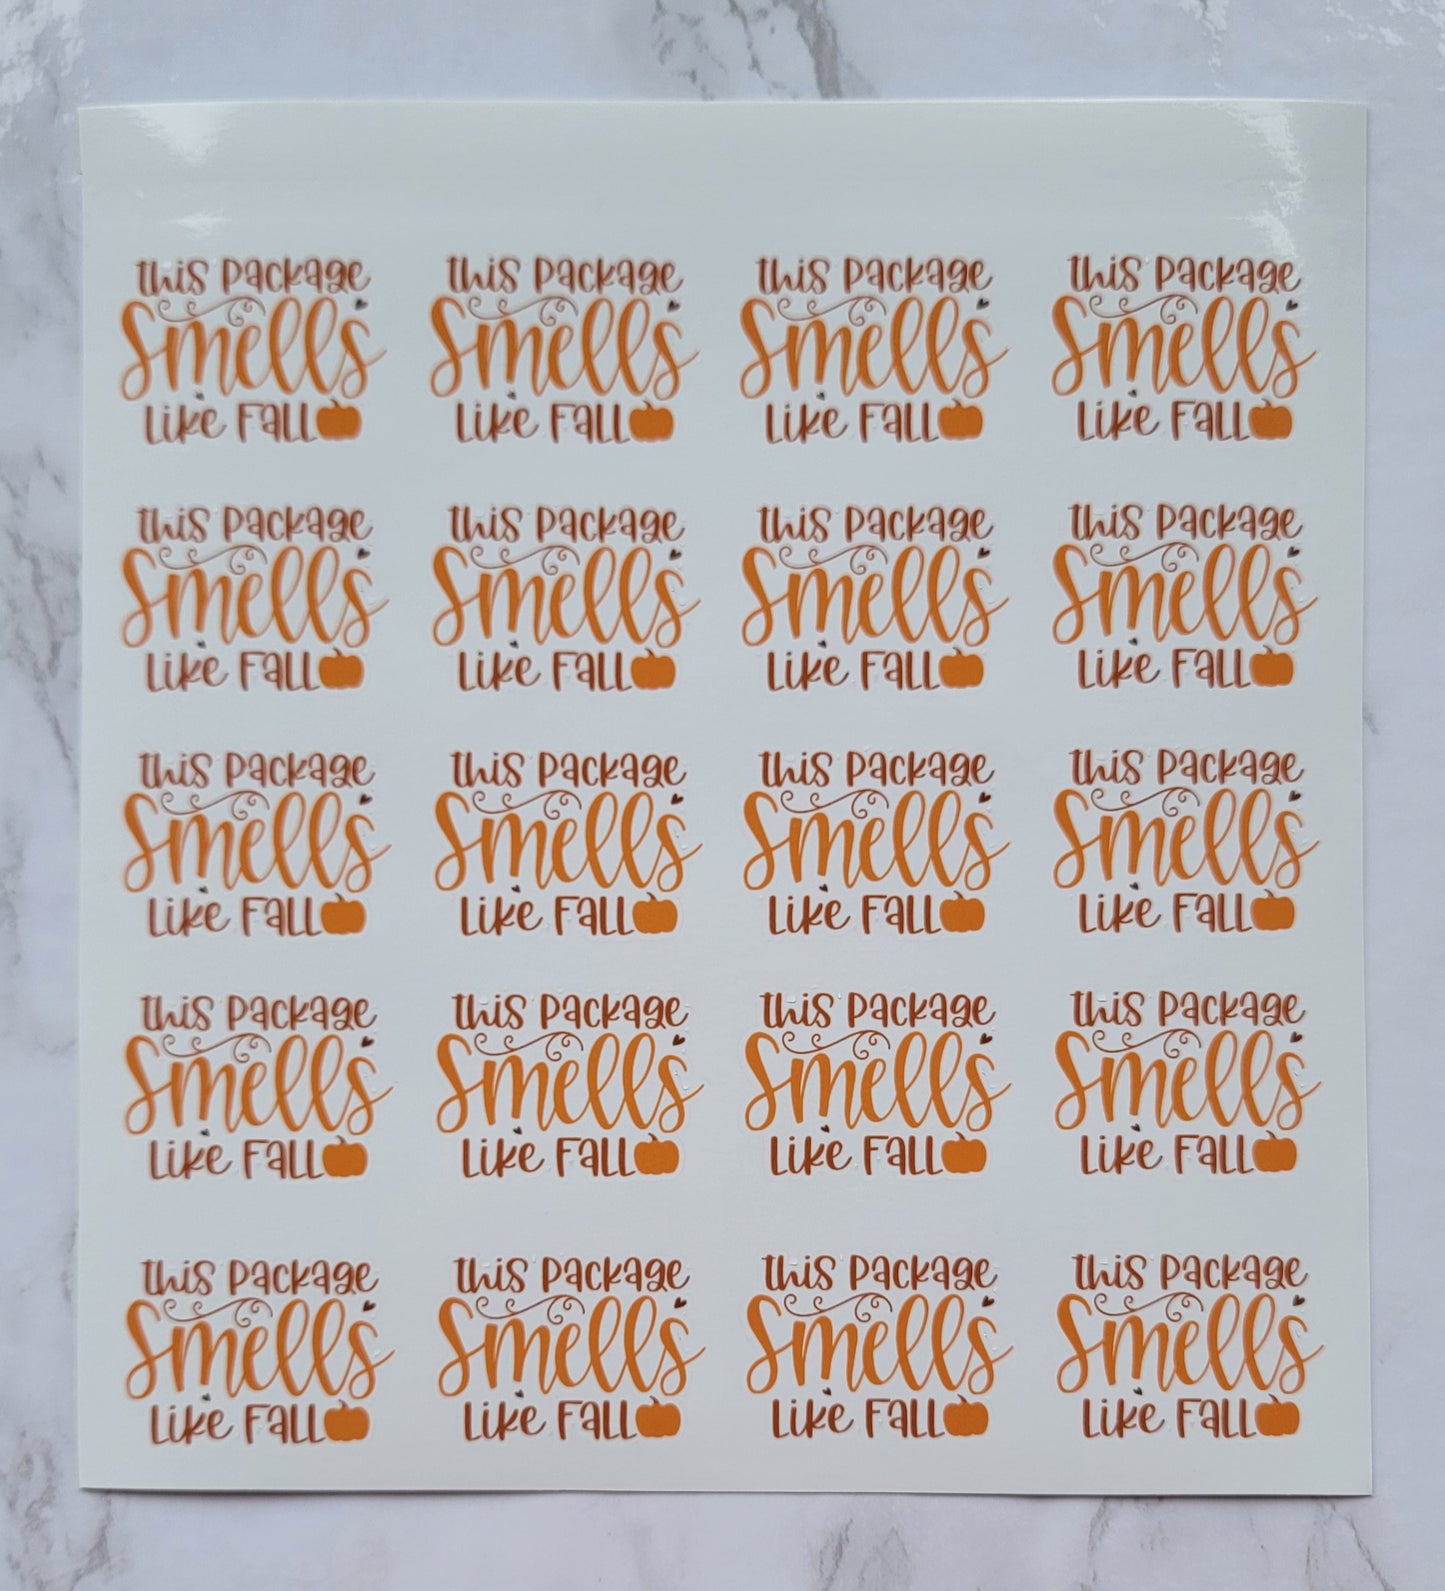 Autumn Theme - "This Package Smells Like Fall" - Orange w/ White Background - Waterproof Sticker Sheet